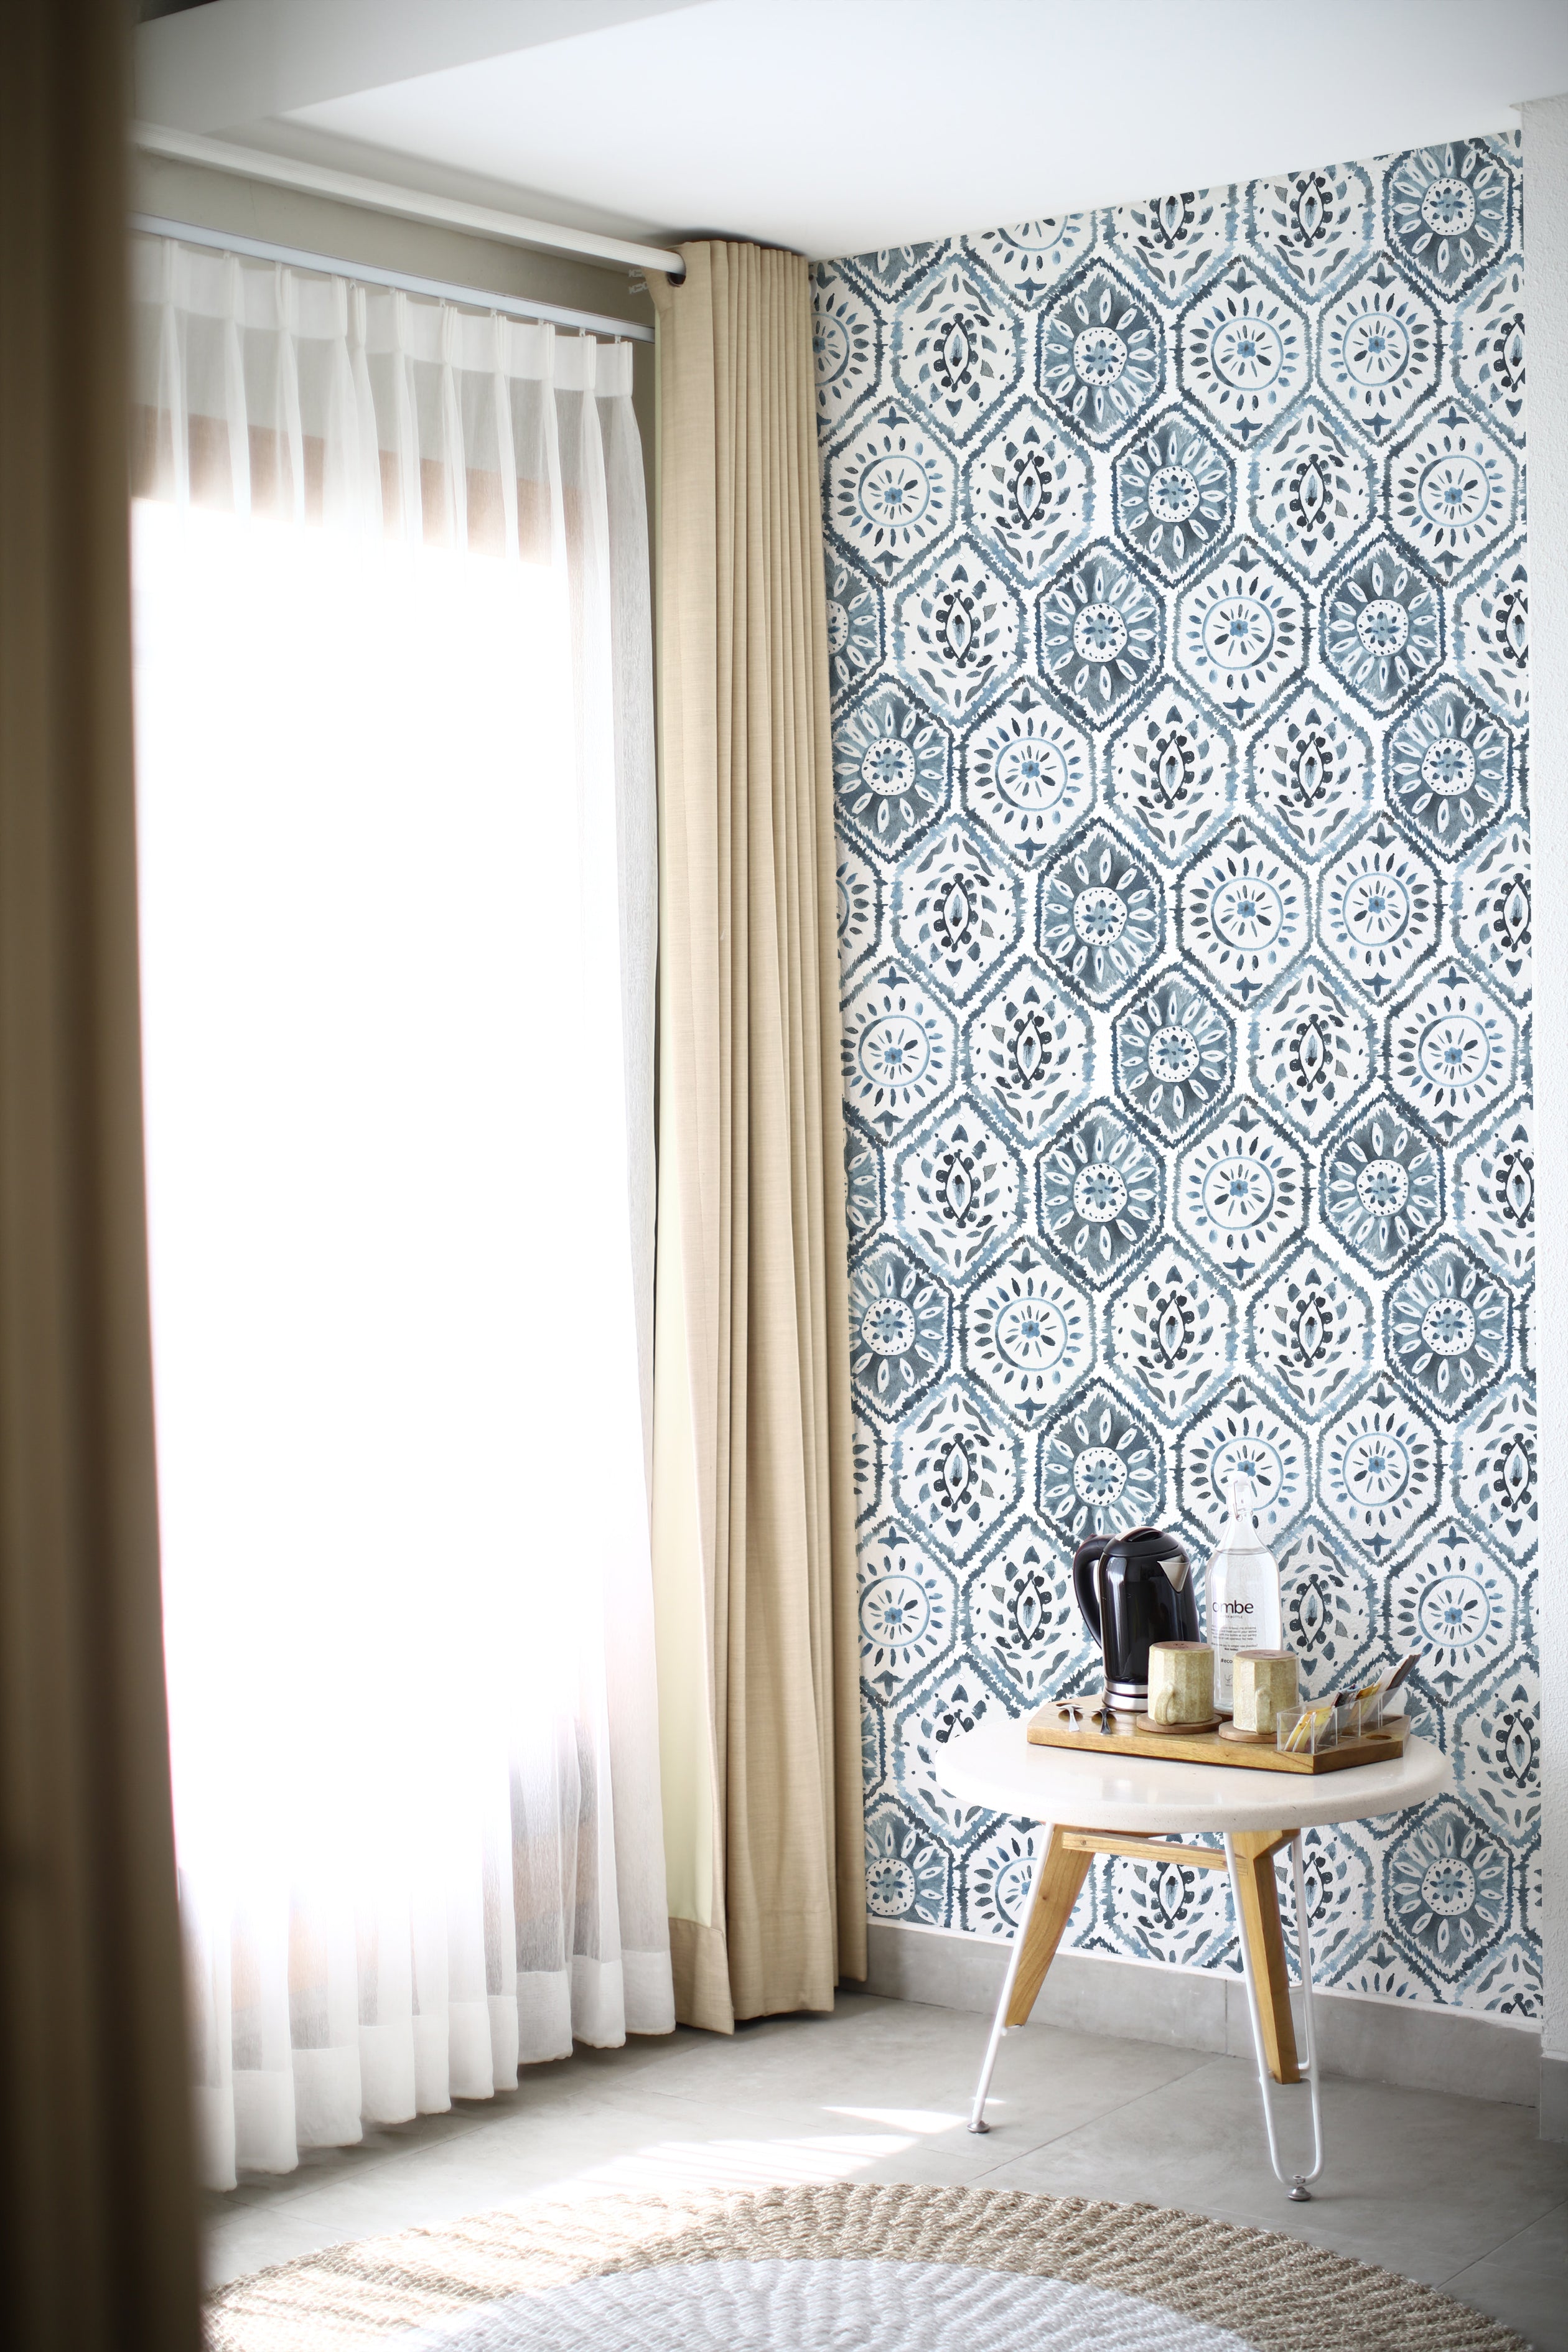 A cozy corner with sunlight filtering through sheer curtains next to a patterned Moroccan Tile wall in indigo blue, accented by a small wooden side table with a coffee maker and cups.